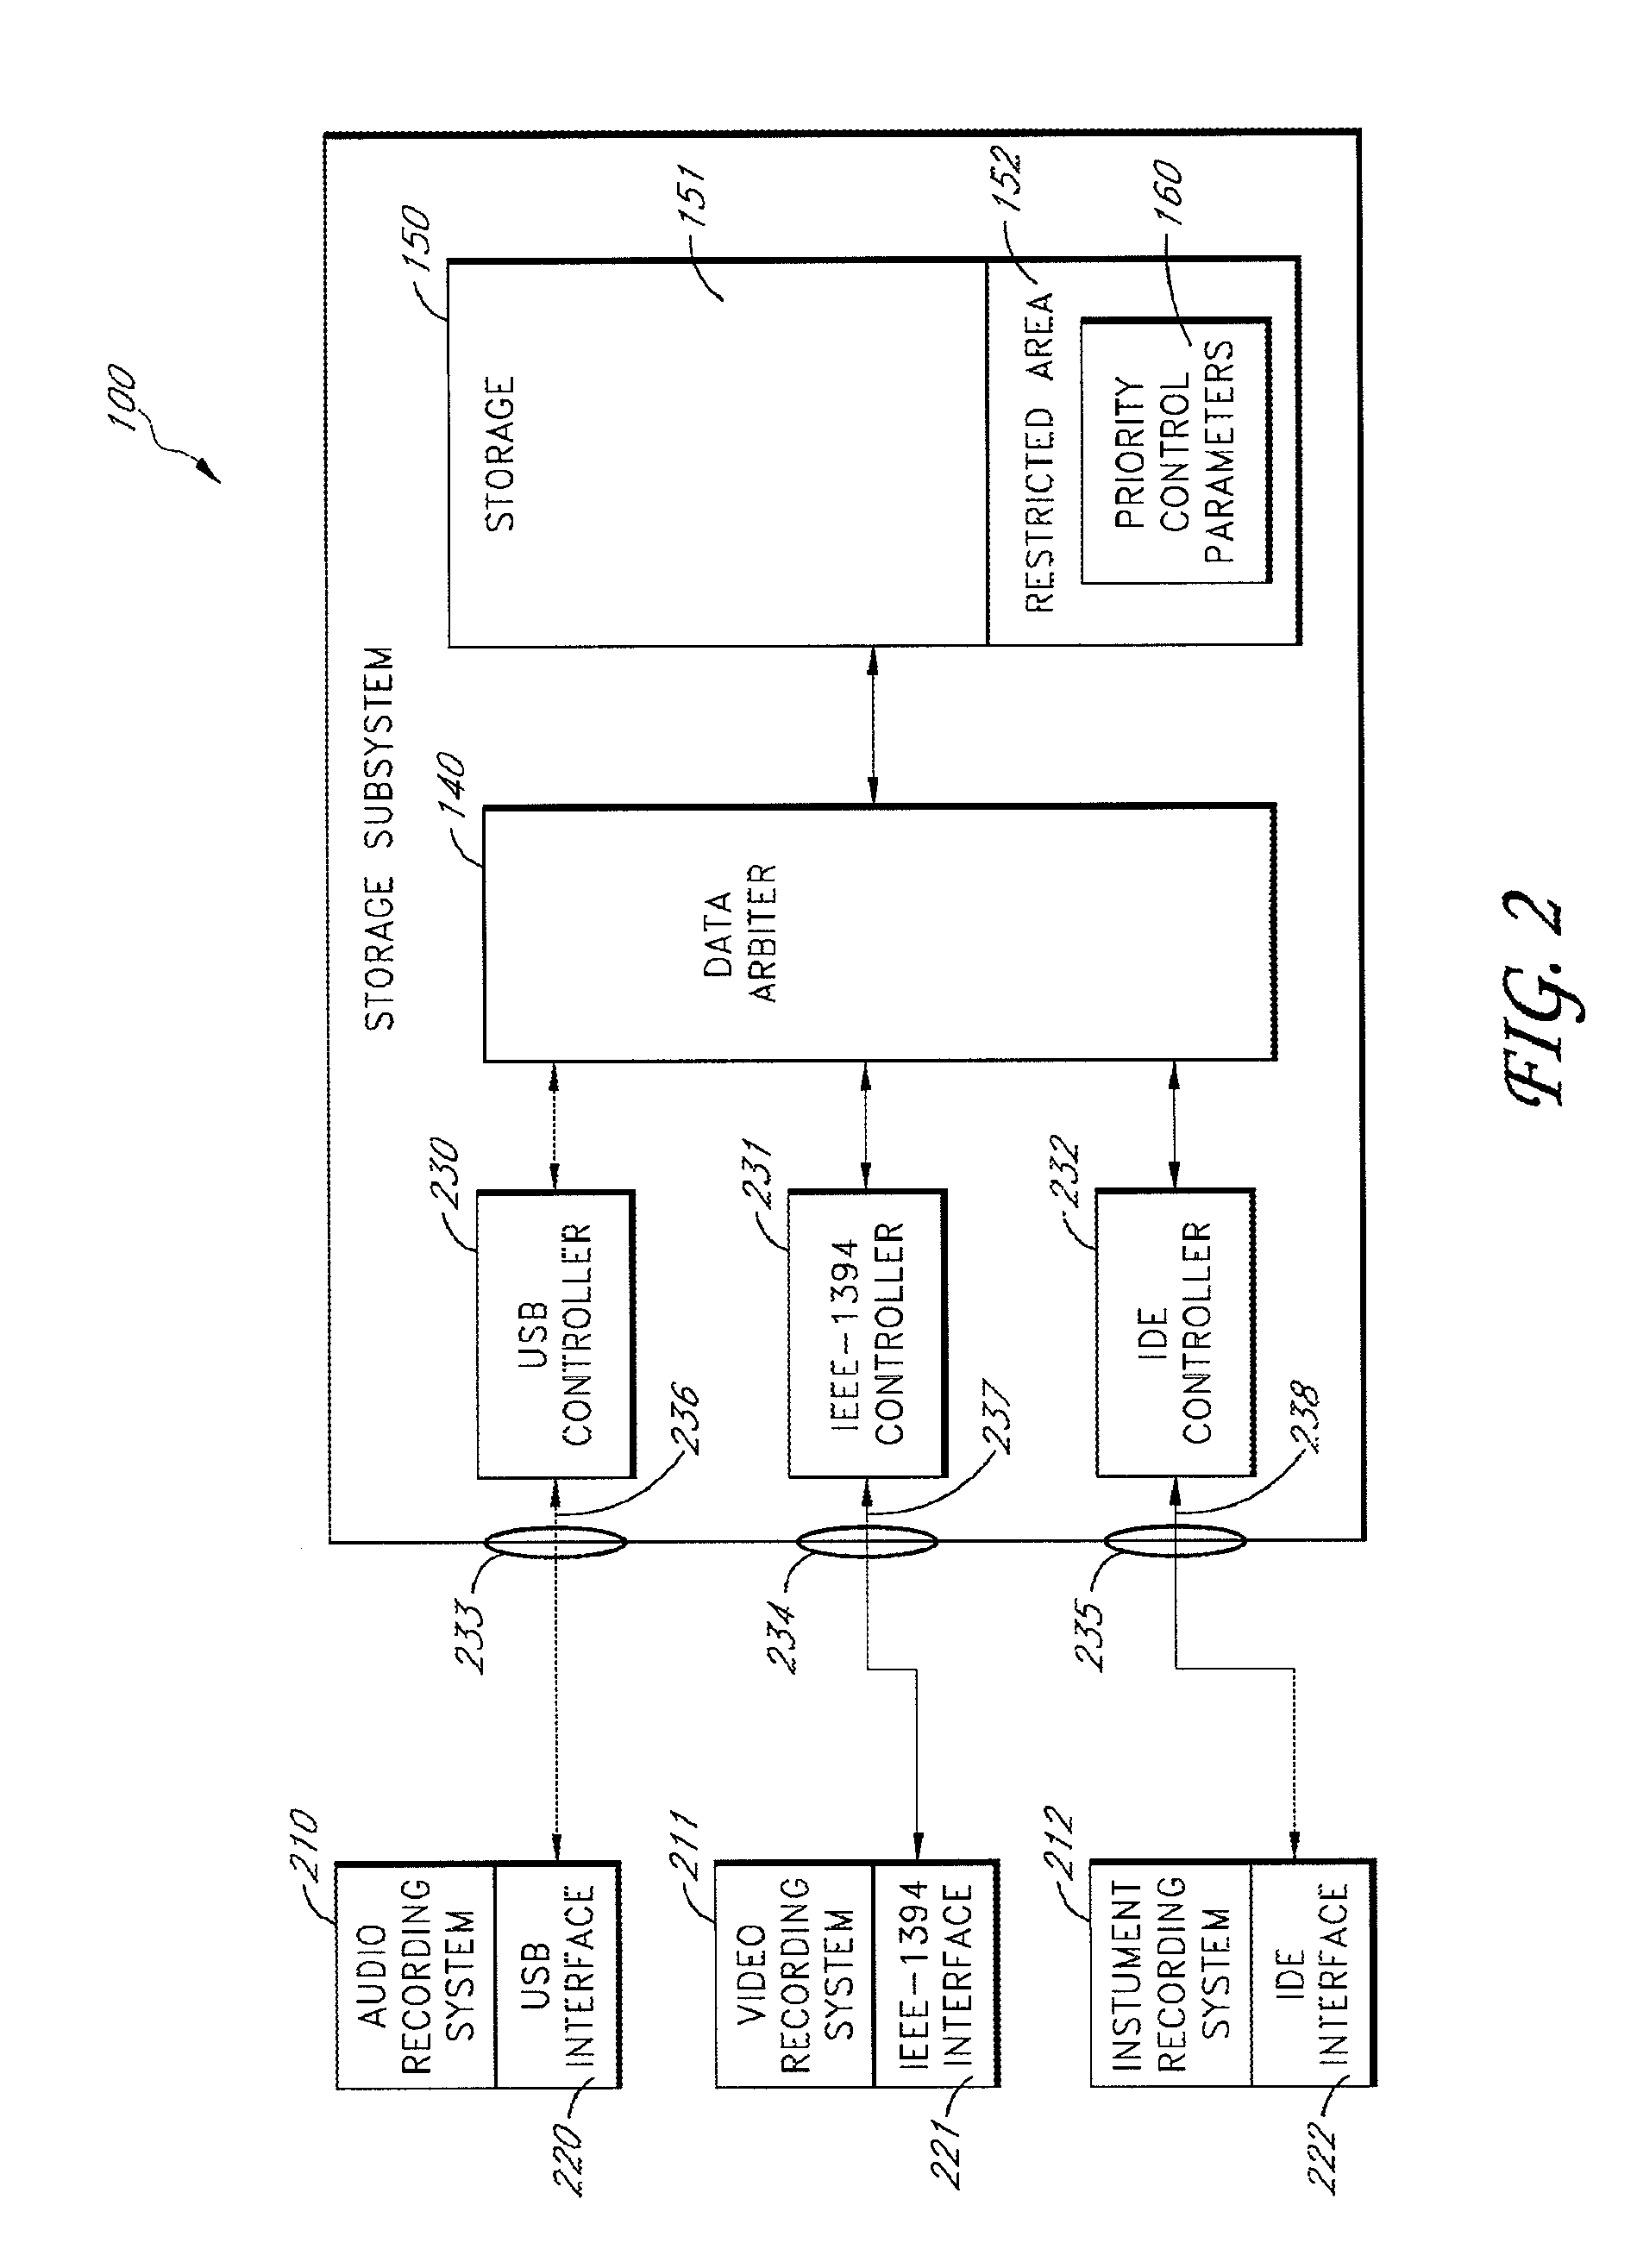 Multi-interface and multi-bus structured solid-state storage subsystem